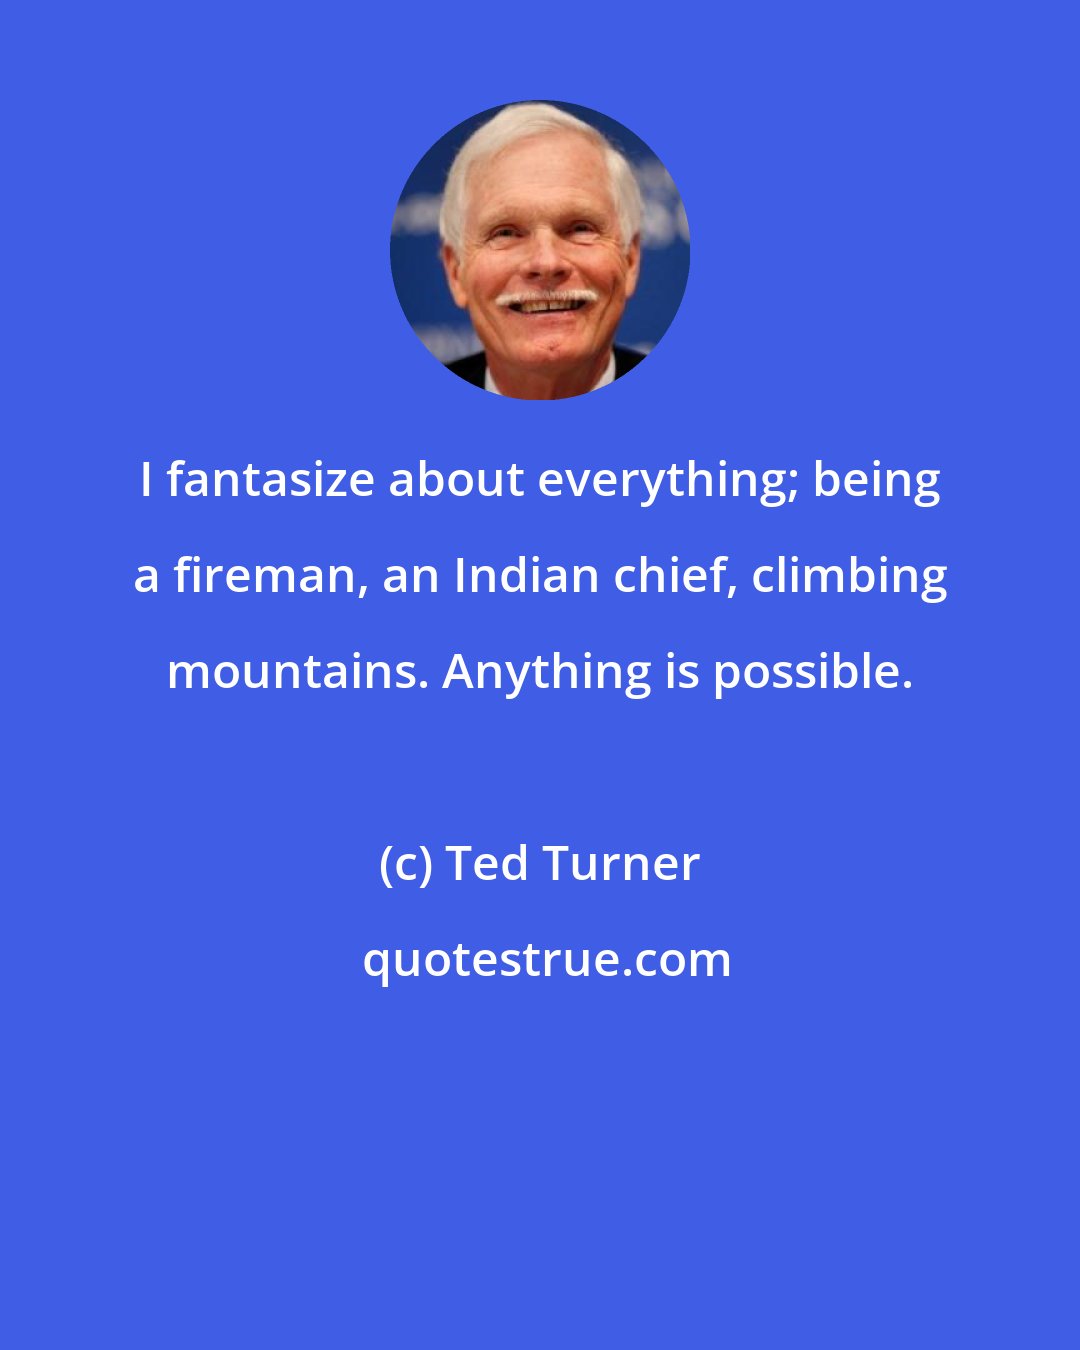 Ted Turner: I fantasize about everything; being a fireman, an Indian chief, climbing mountains. Anything is possible.